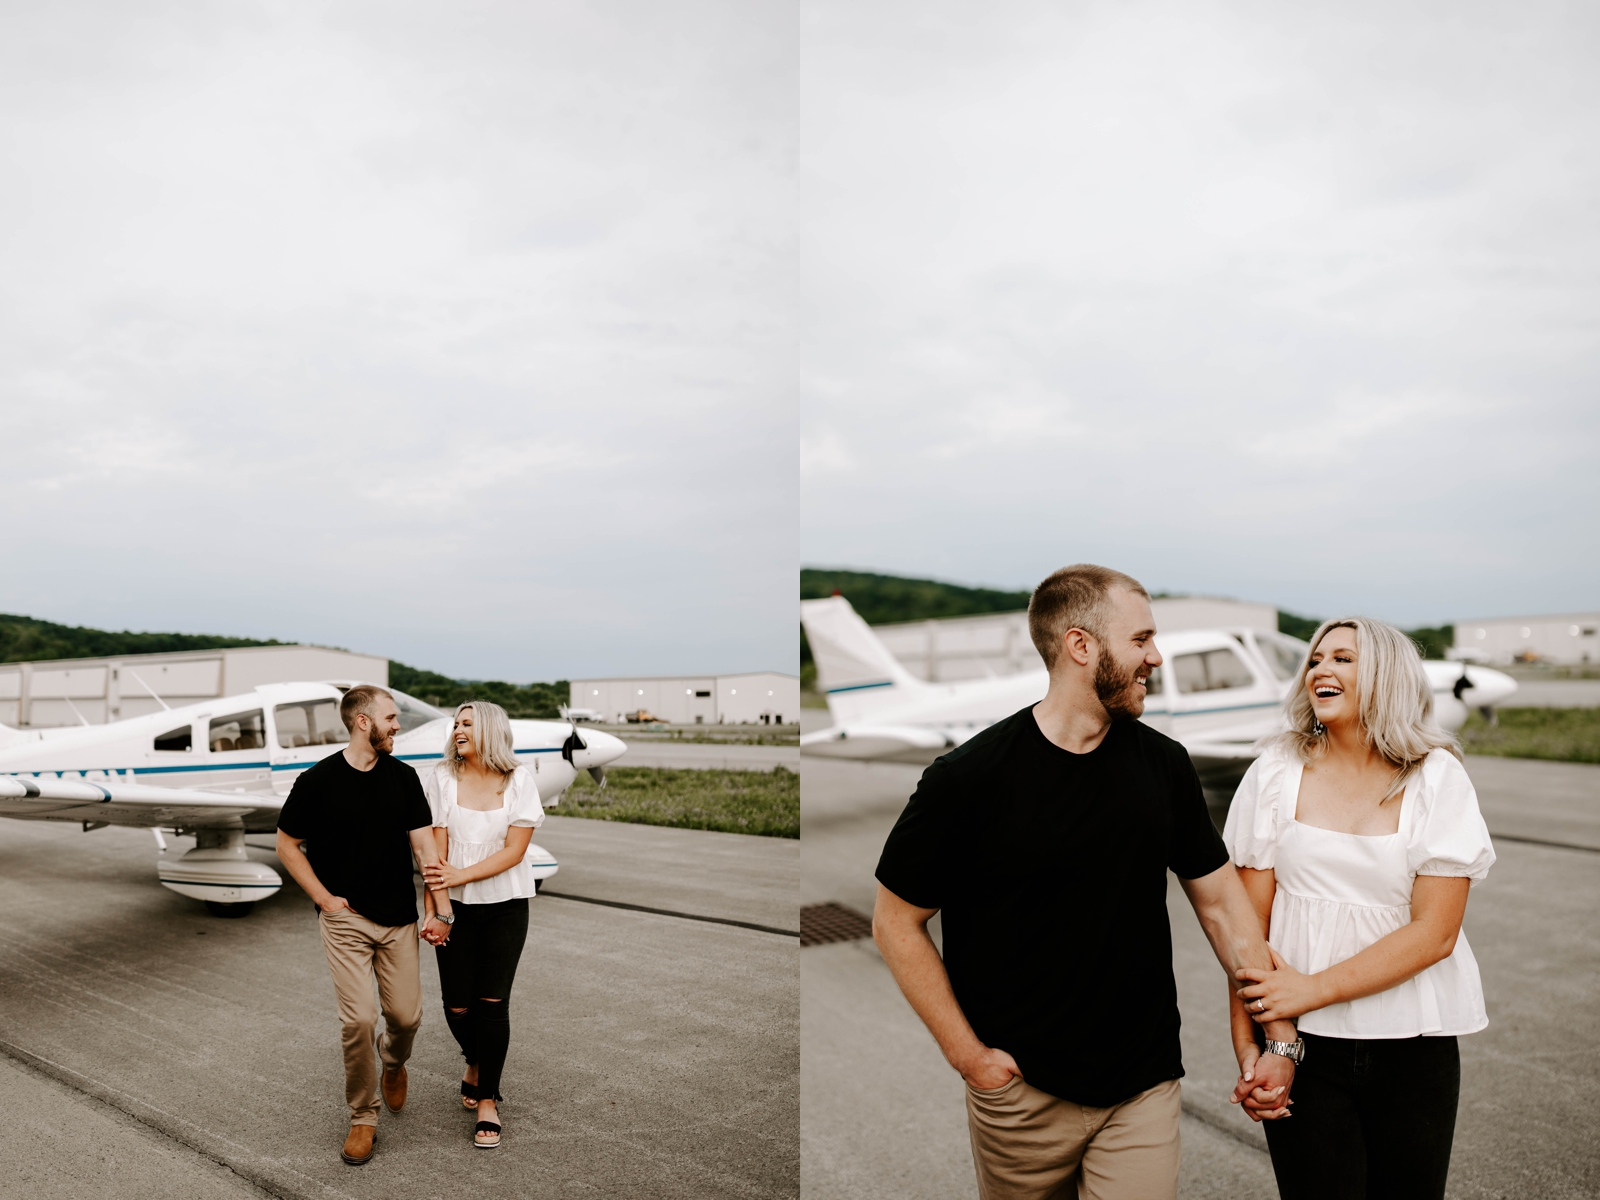 Pittsburgh airport engagement photo sessions